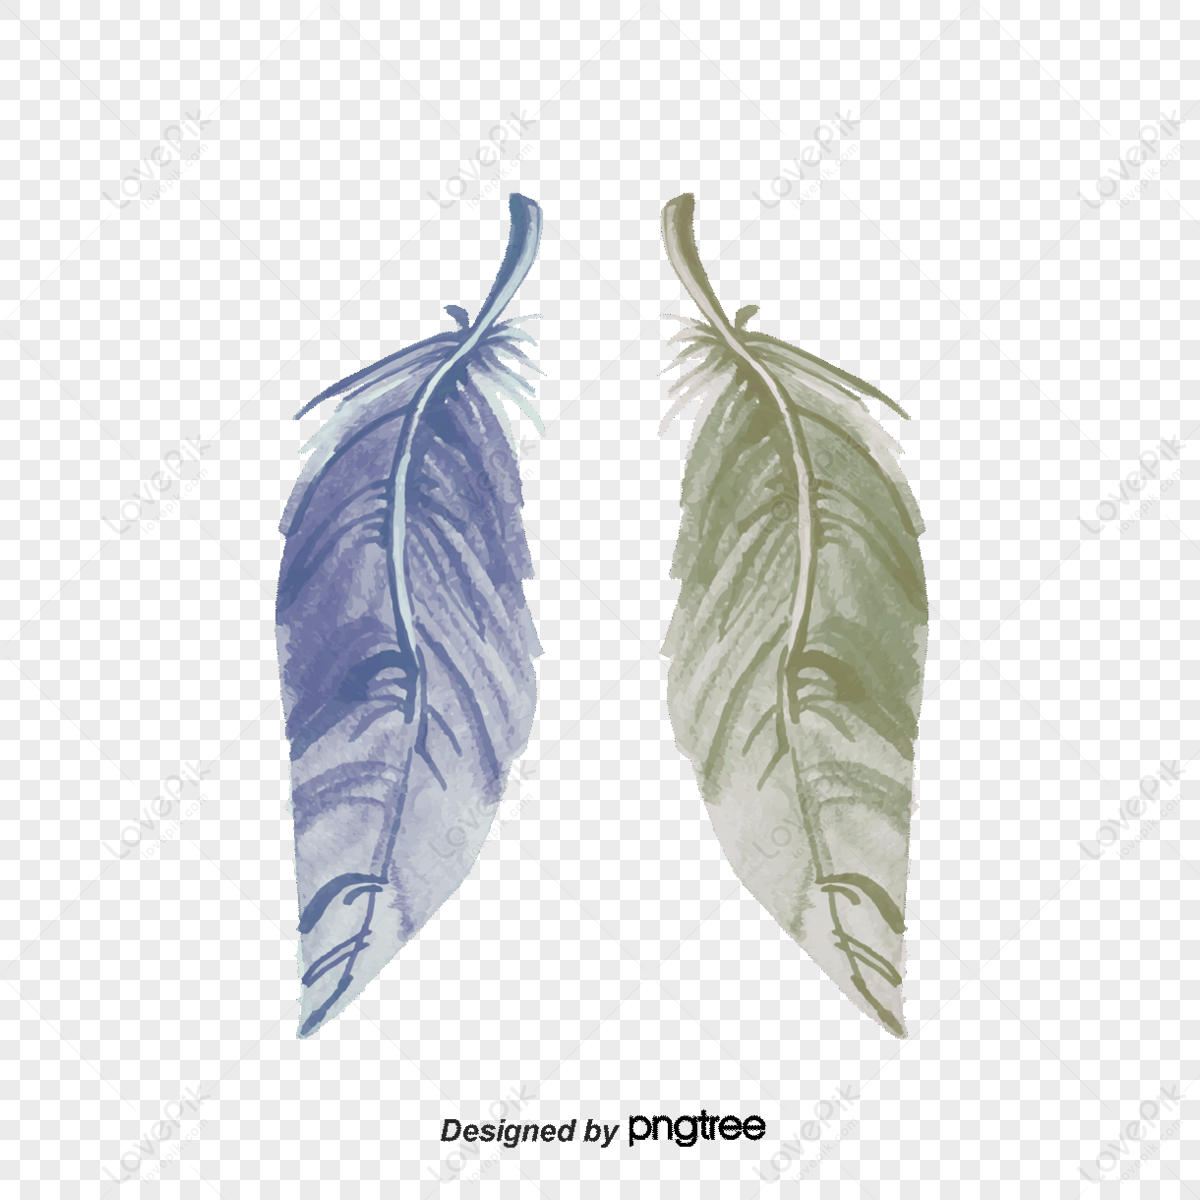 Watercolor Feather PNG Image, Watercolor Blue Feather, Illustration, Feather,  Watercolor PNG Image For Free Download